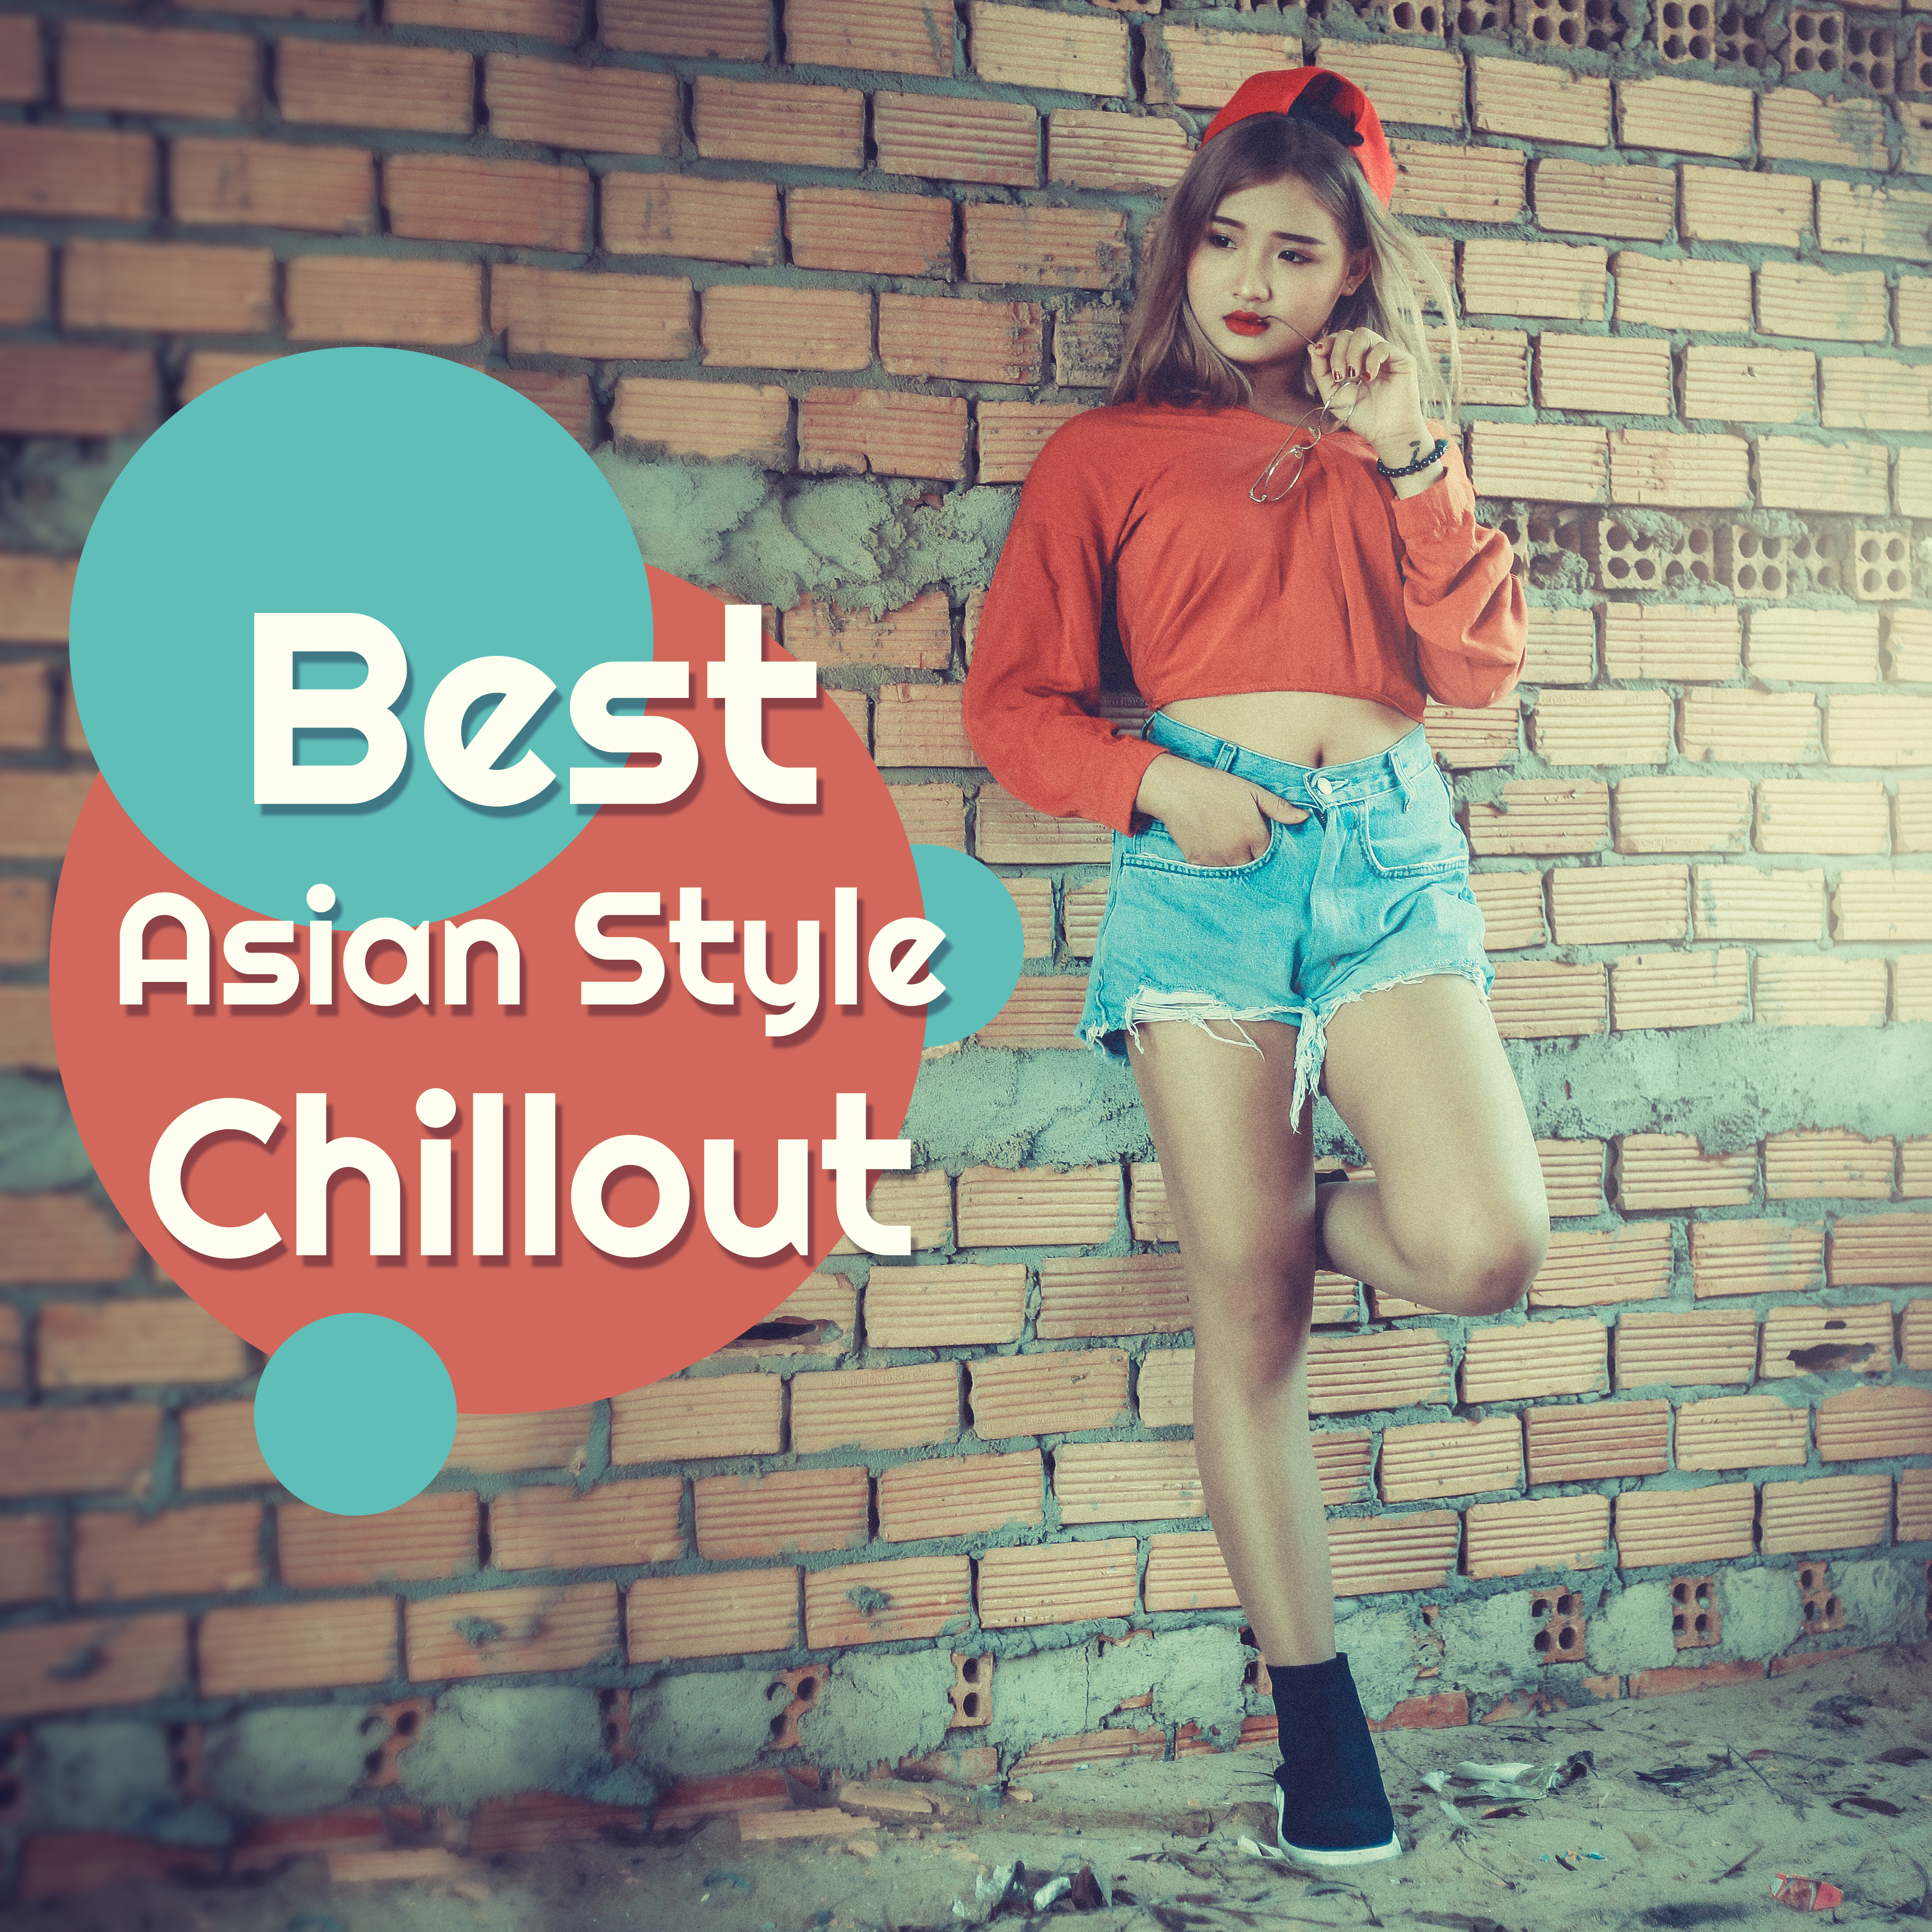 Best Asian Style Chillout